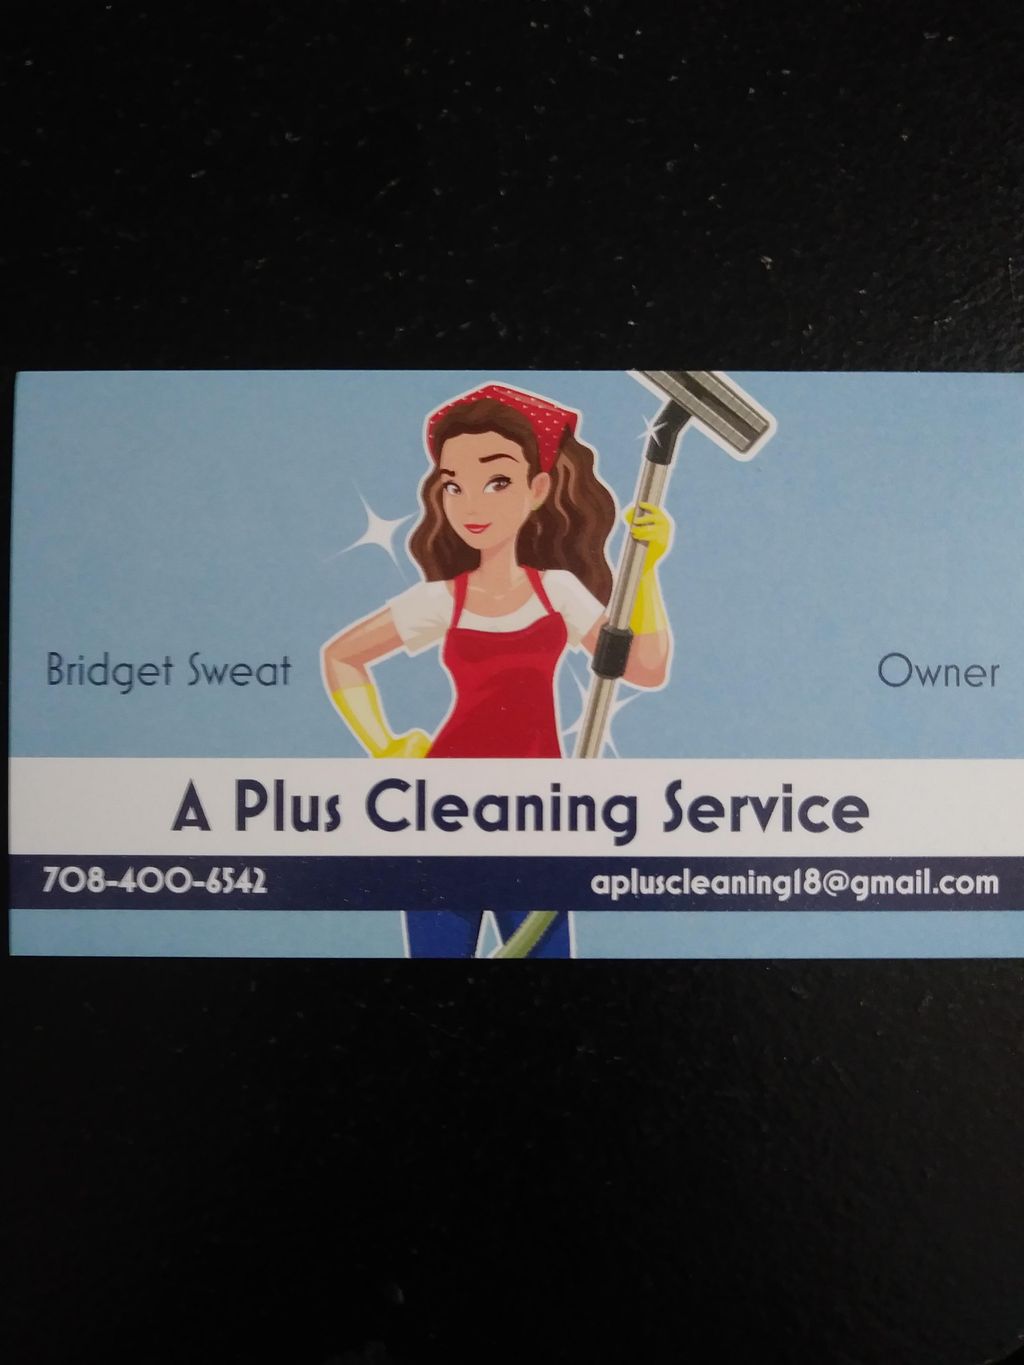 A Plus cleaning service